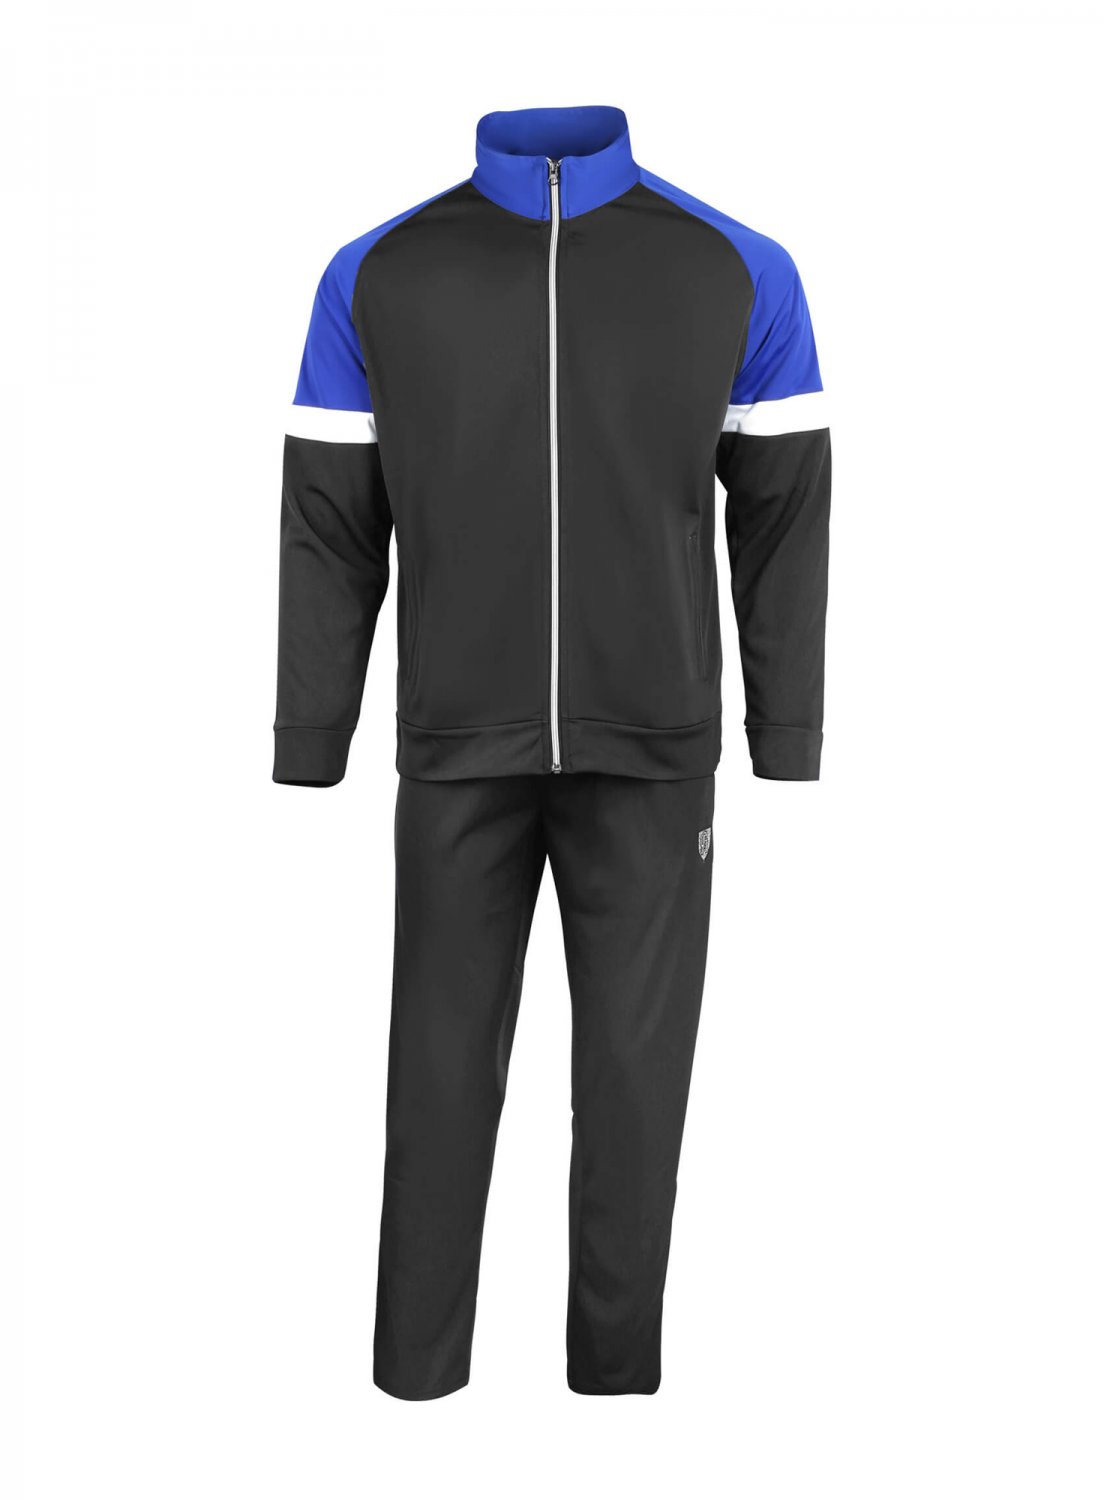 Men's CA Sports PLAYER-EDITION Tracksuit Ideal for sports and casual wearing